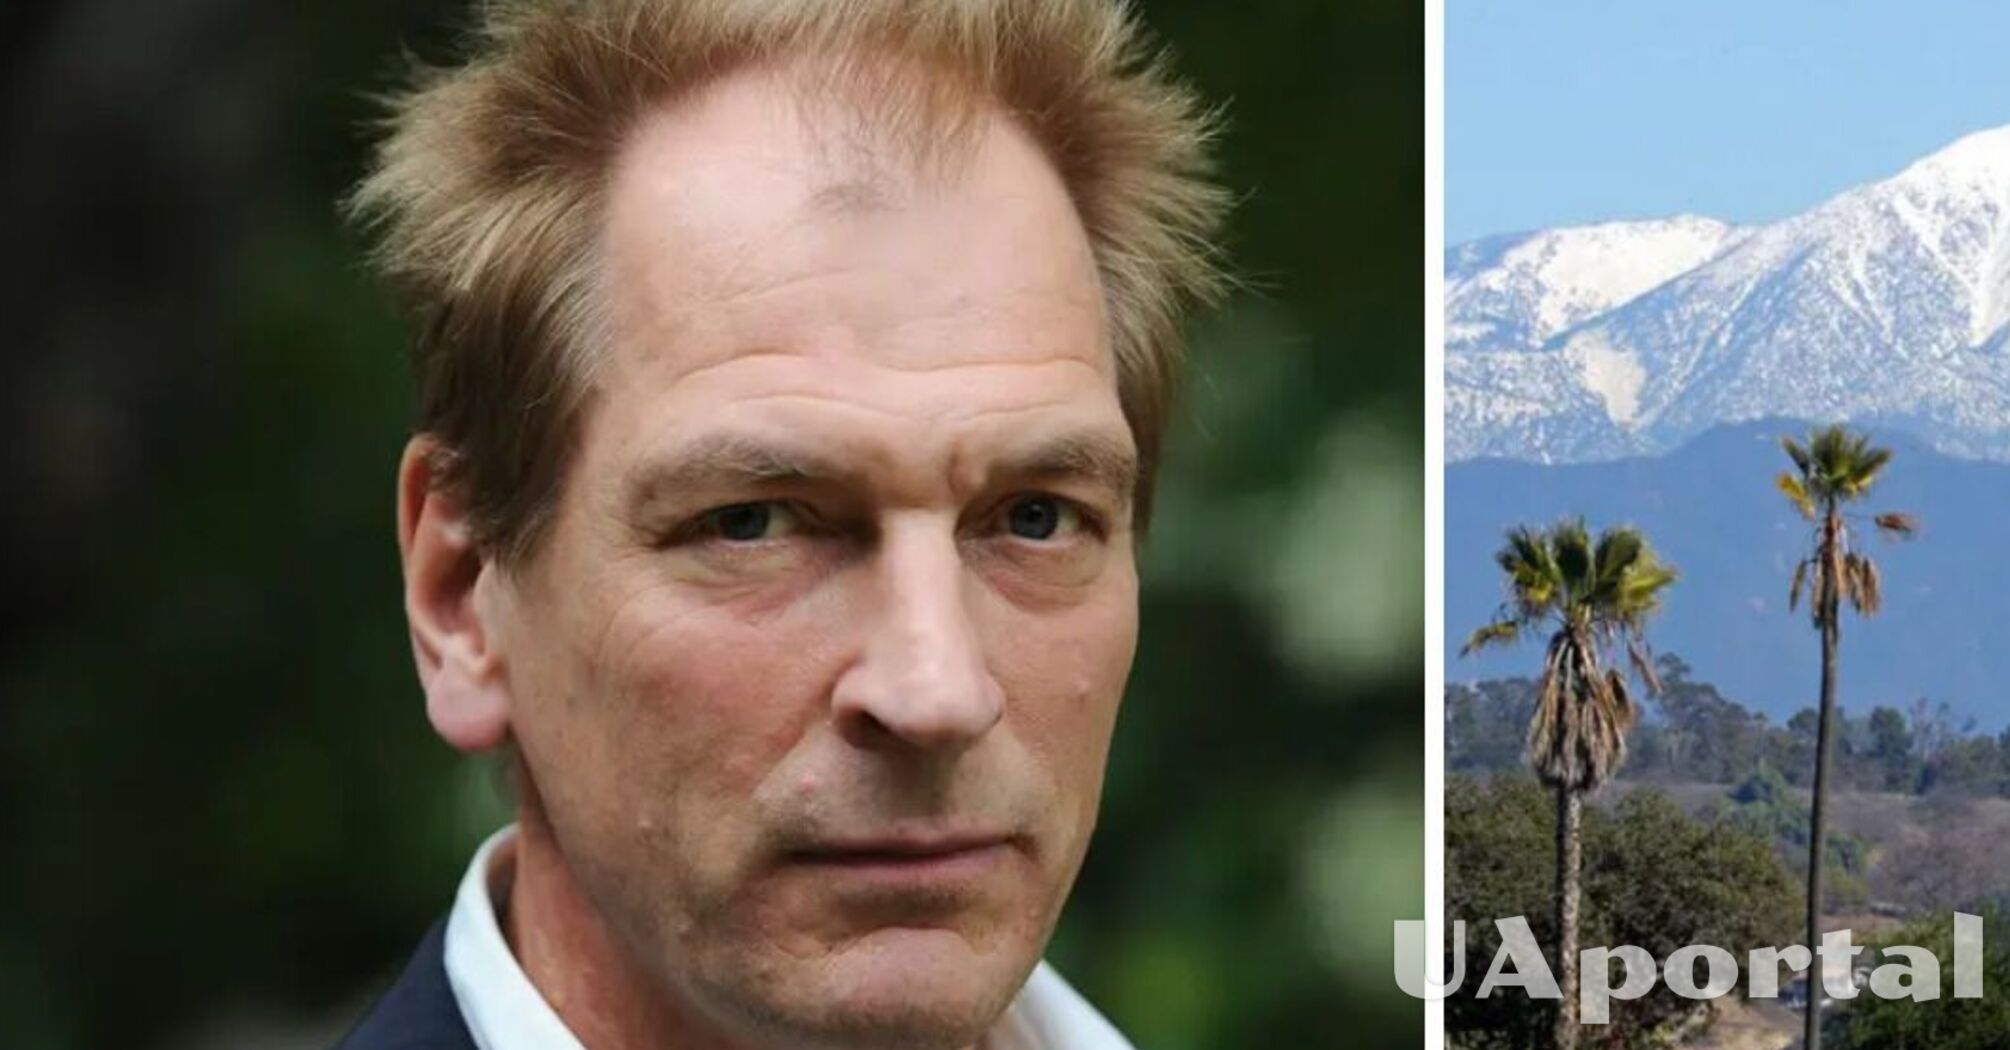 Human remains found in the mountains where actor Julian Sands disappeared in January